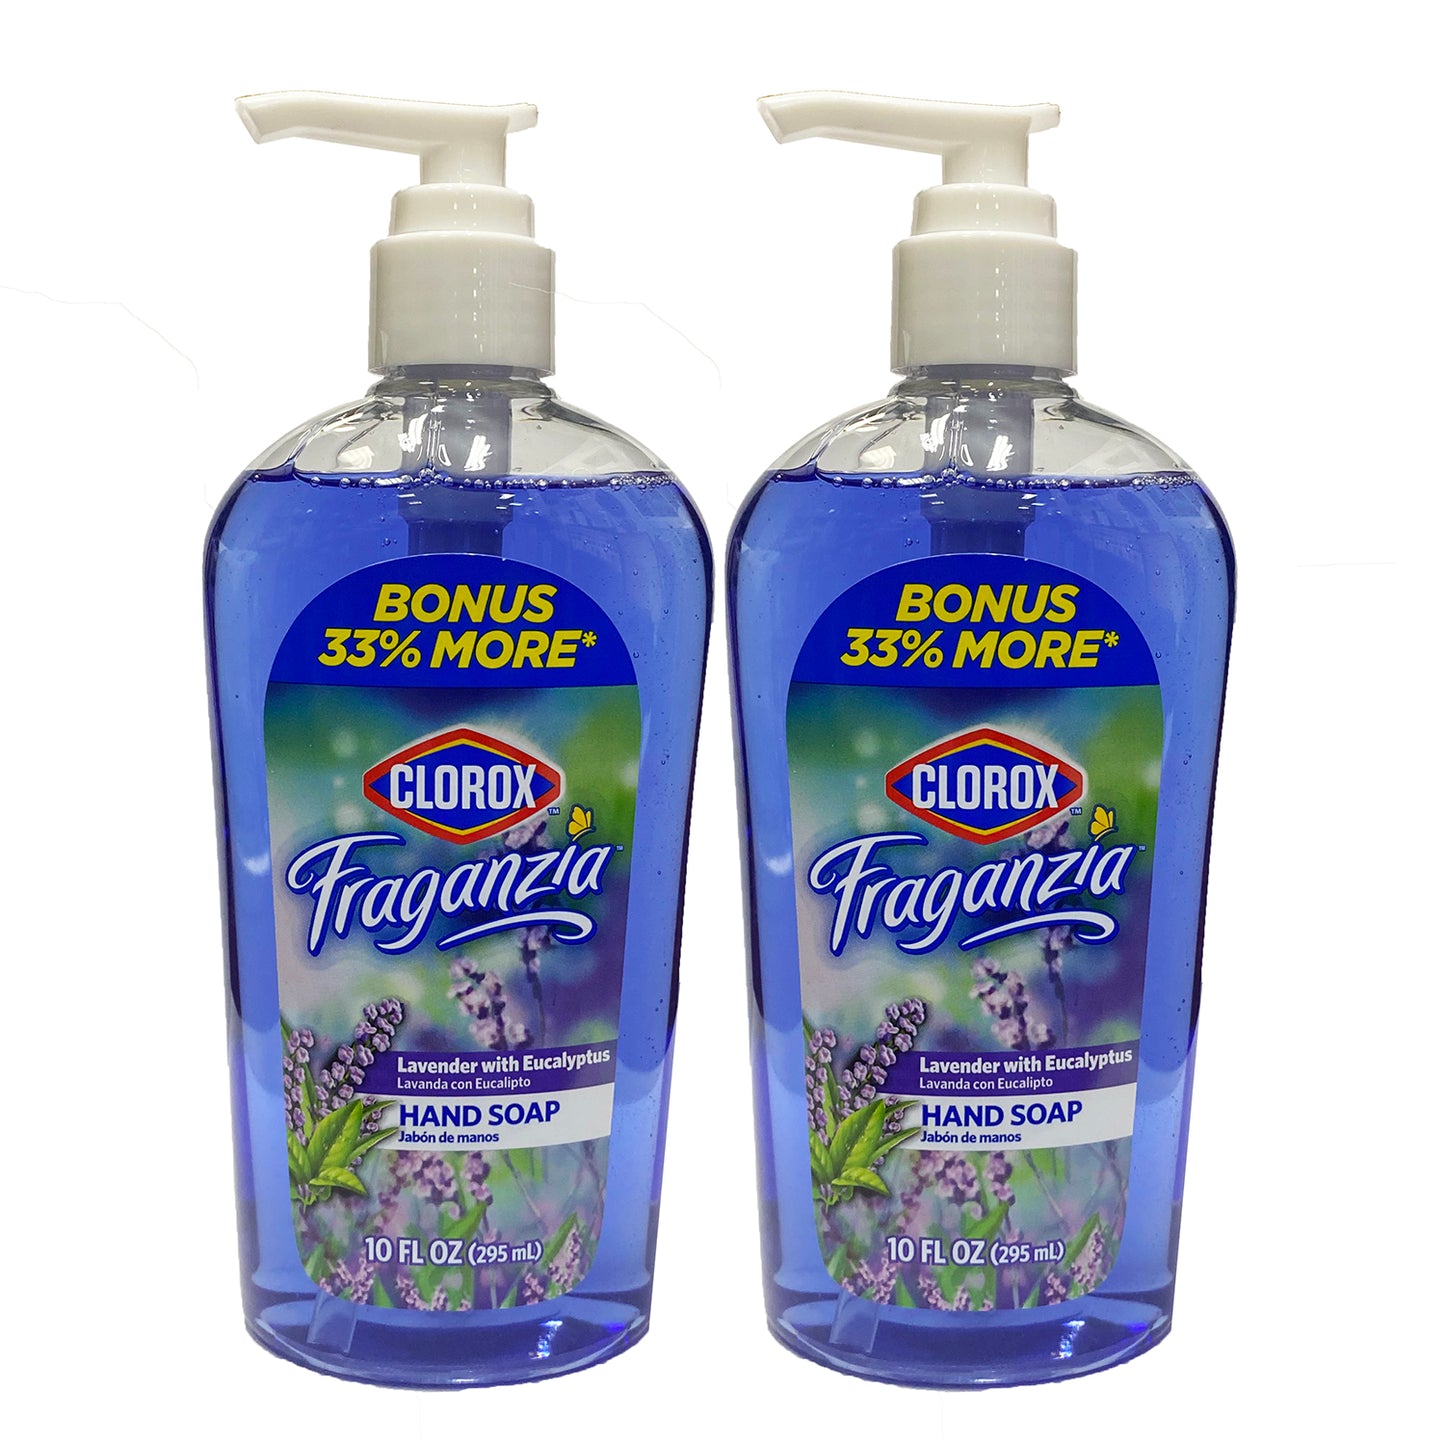 Clorox Fraganzia Hand Soap Lavender With Eucalyptus 10 oz (Pack Of 2)